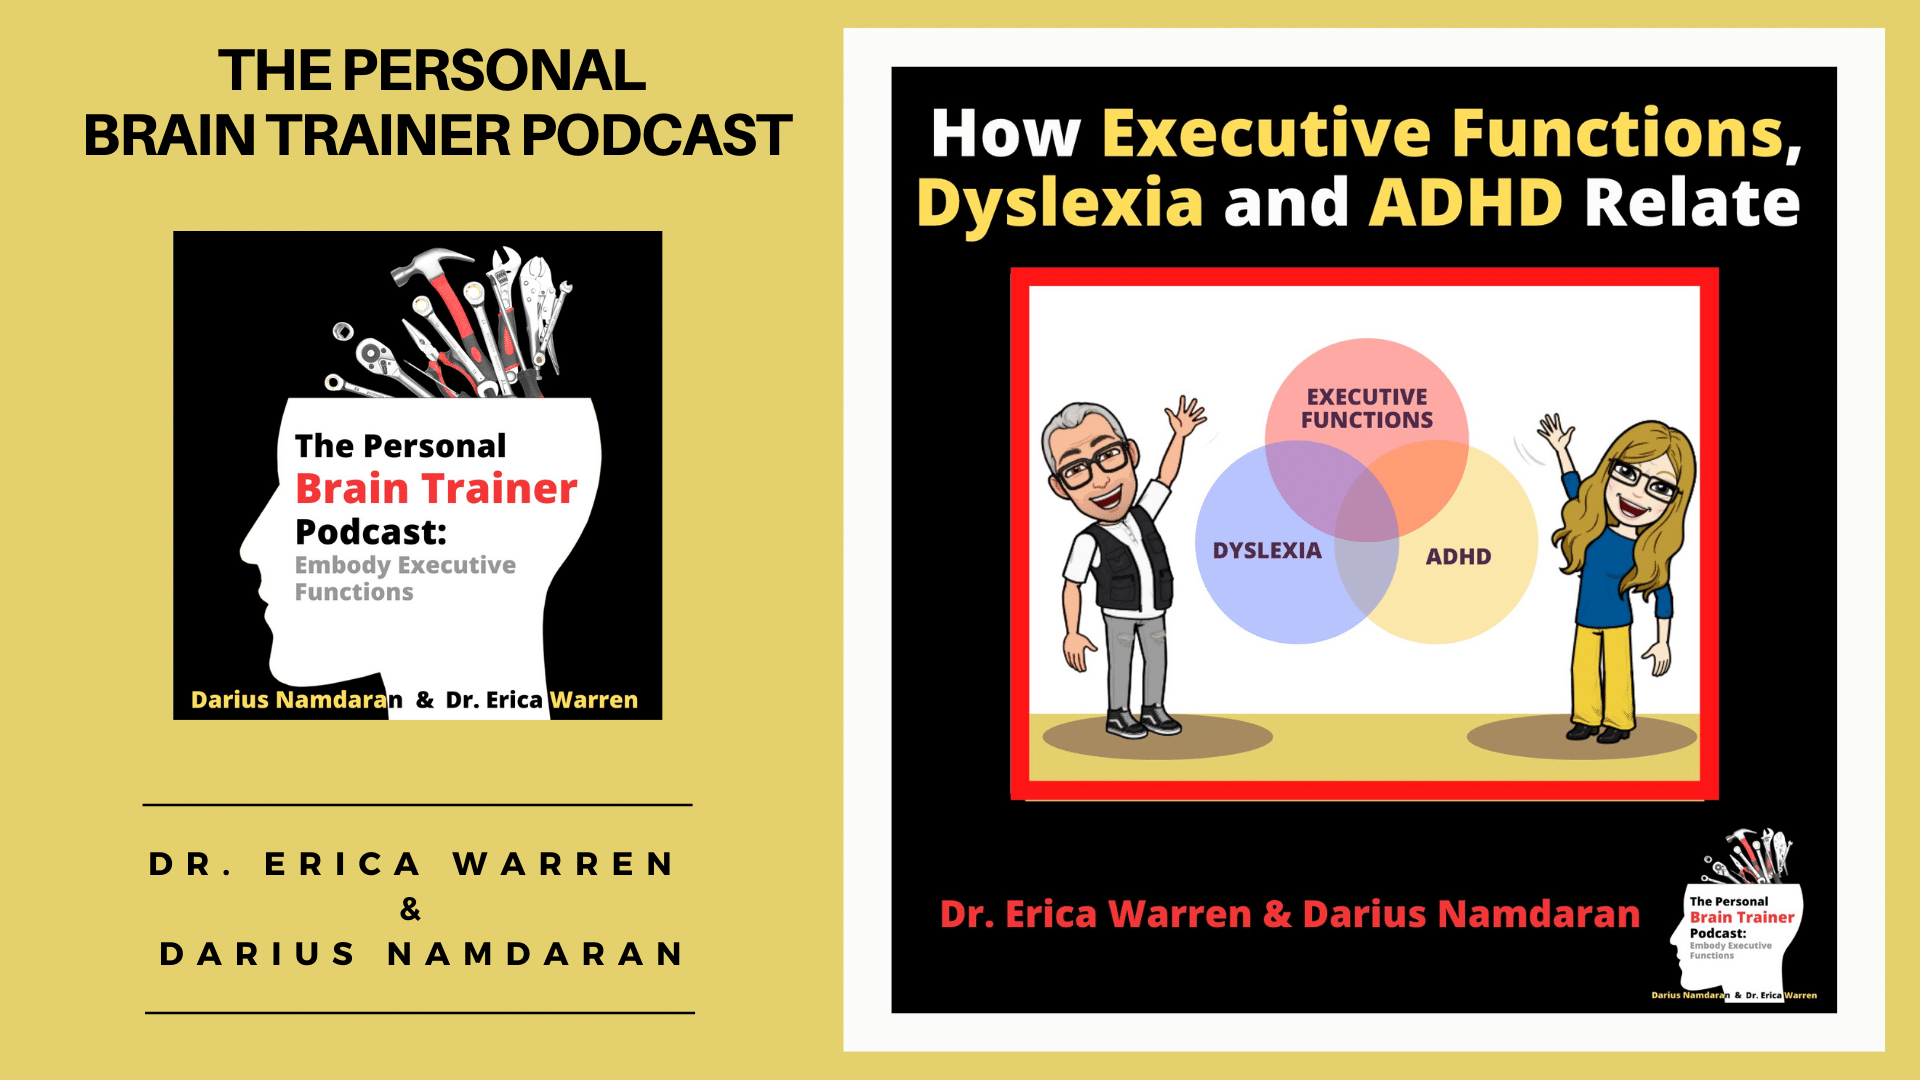 The Personal Brain Trainer Podcast Episode 12